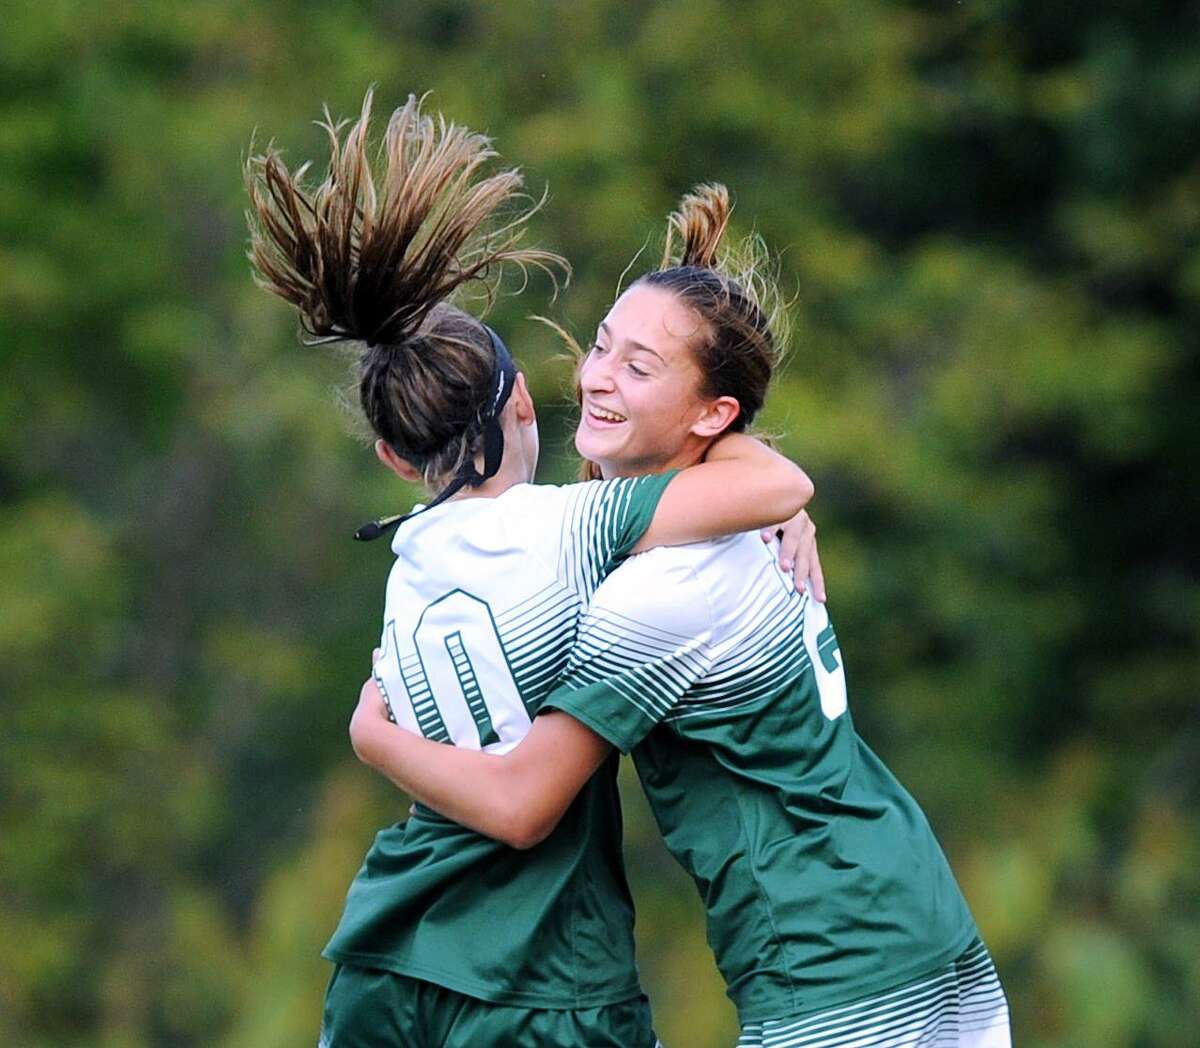 Isabel DeVita, left, of Sacred Heart Greenwich congratulates teammate Alana Frederick on scoring a first-half goal against Choate Rosemary Hall Wednesday in Greenwich.